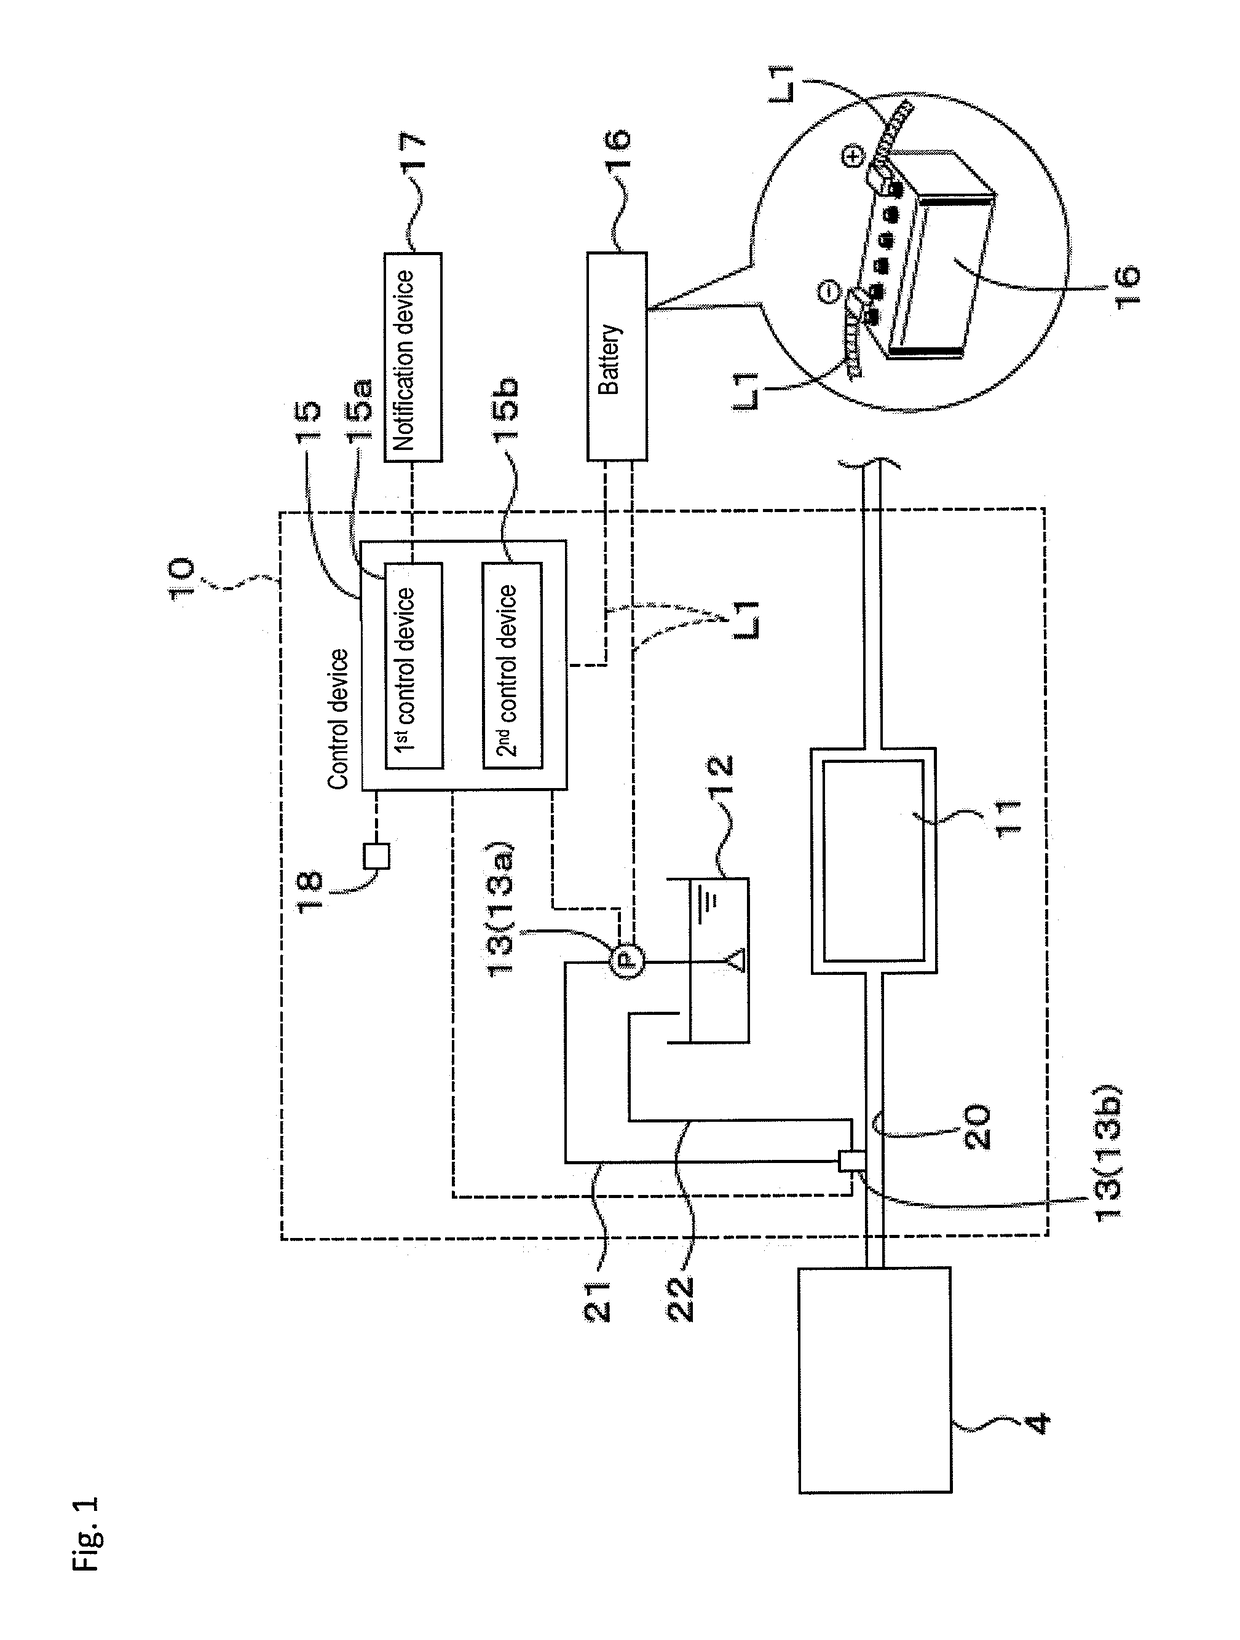 Exhaust gas purification system and method for a work vehicle